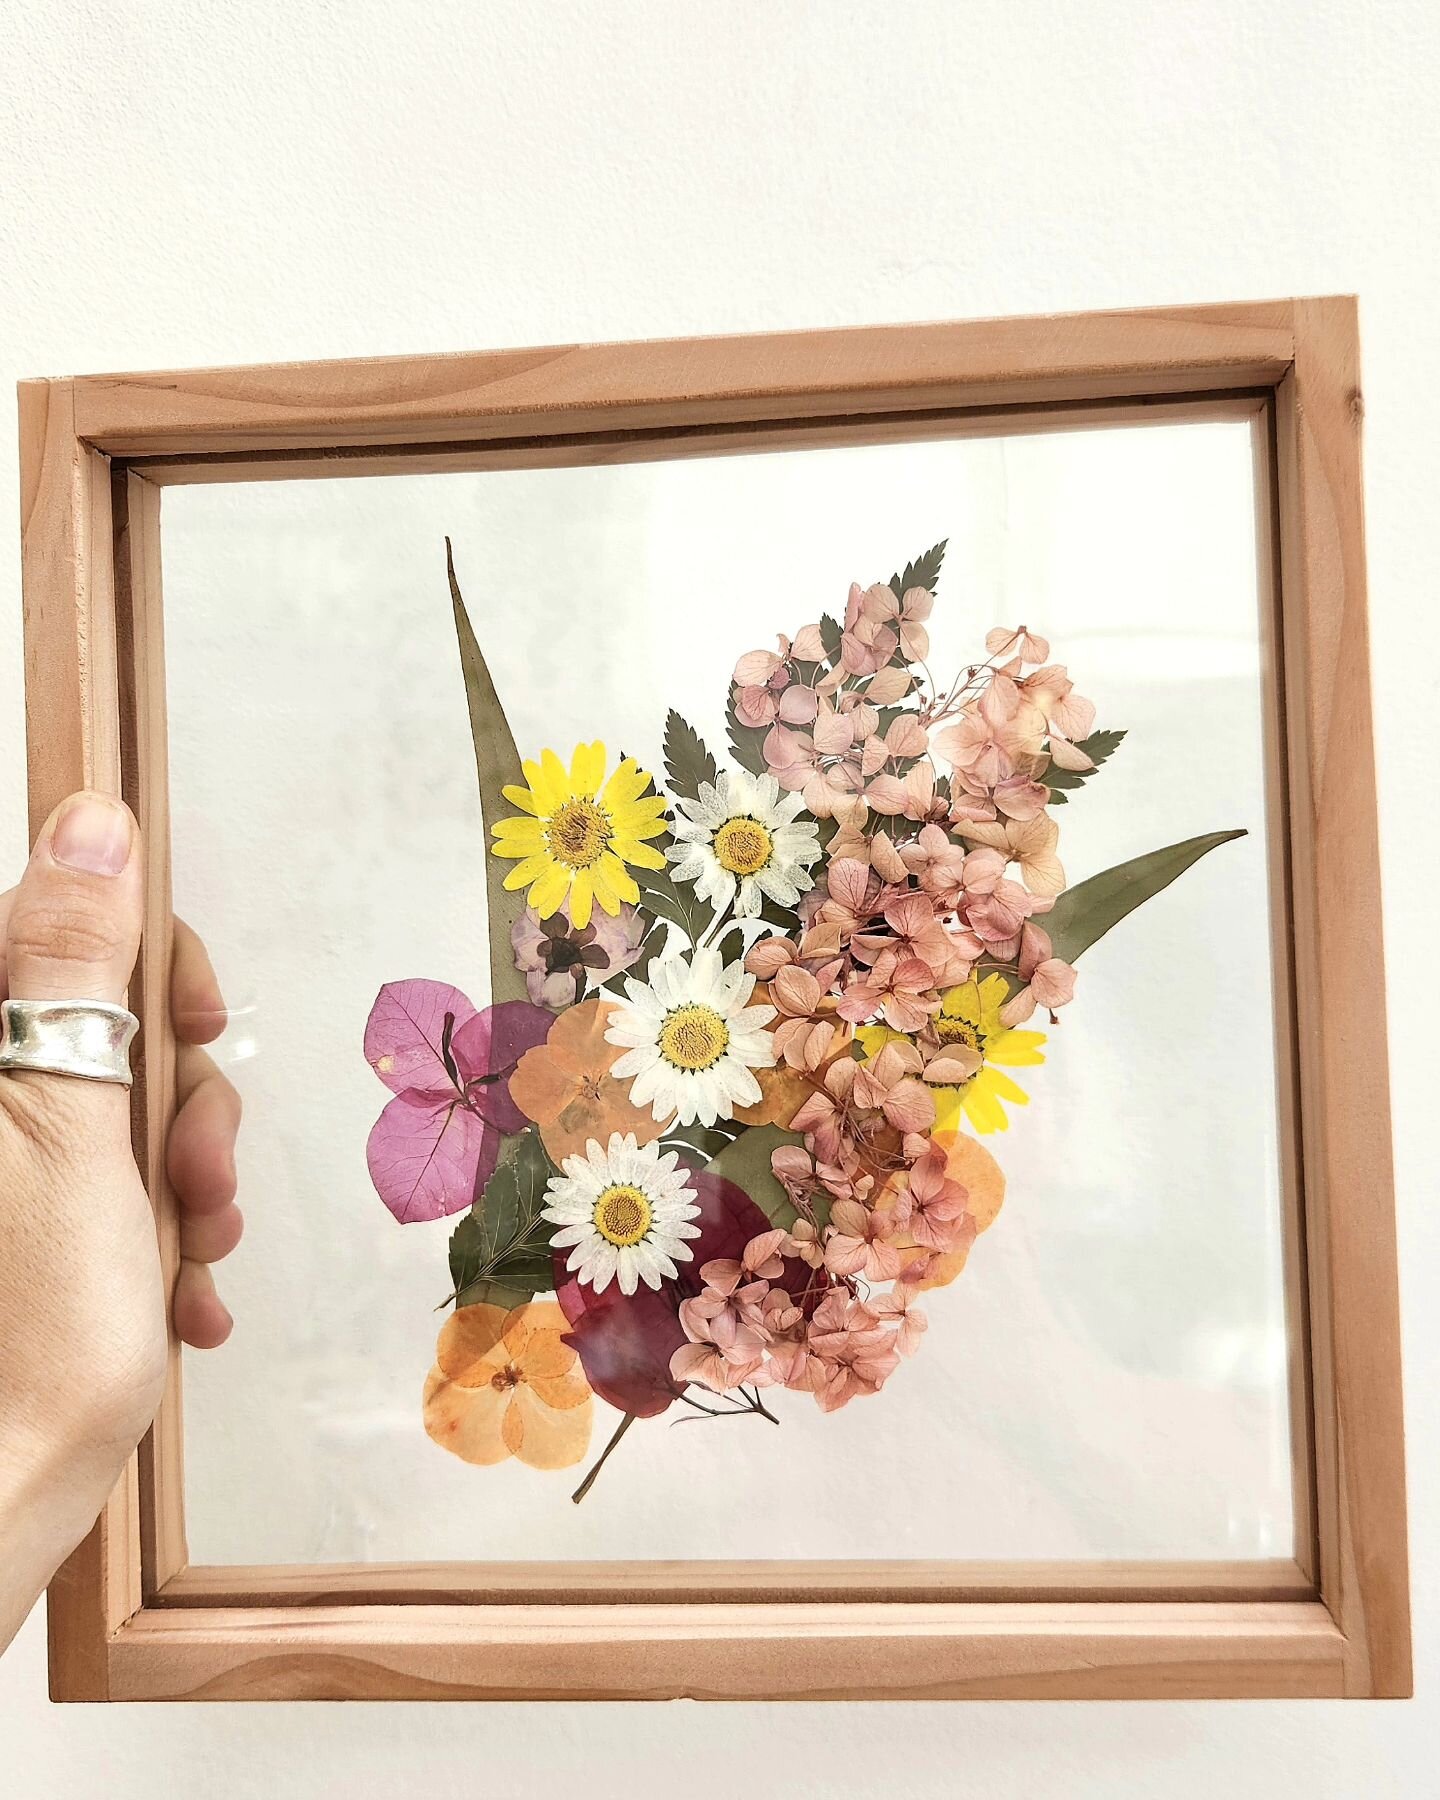 Handmade gifts are the best! 
Whether it is for yourself or for someone else 🥰

Do you want to make one of these floating flower frames?
Join us on the 14th of April for a lovely Sunday afternoon workshop. Details on our website 🌸

#pressedflowers 